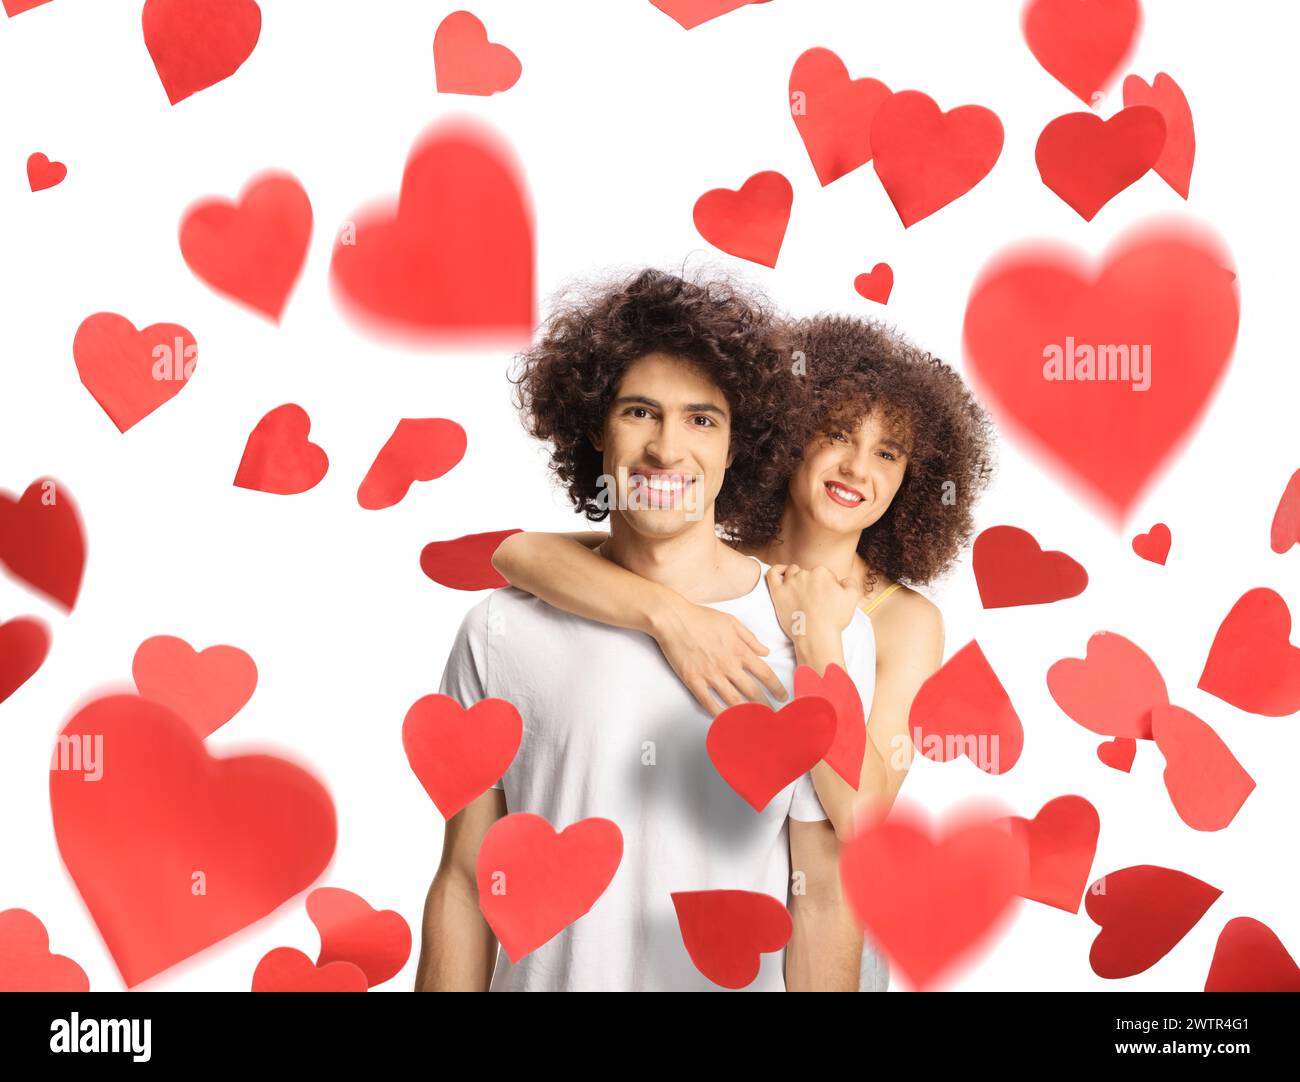 Young man and woman with curly hair in embrace standing under red hearts isolated on white background Stock Photo